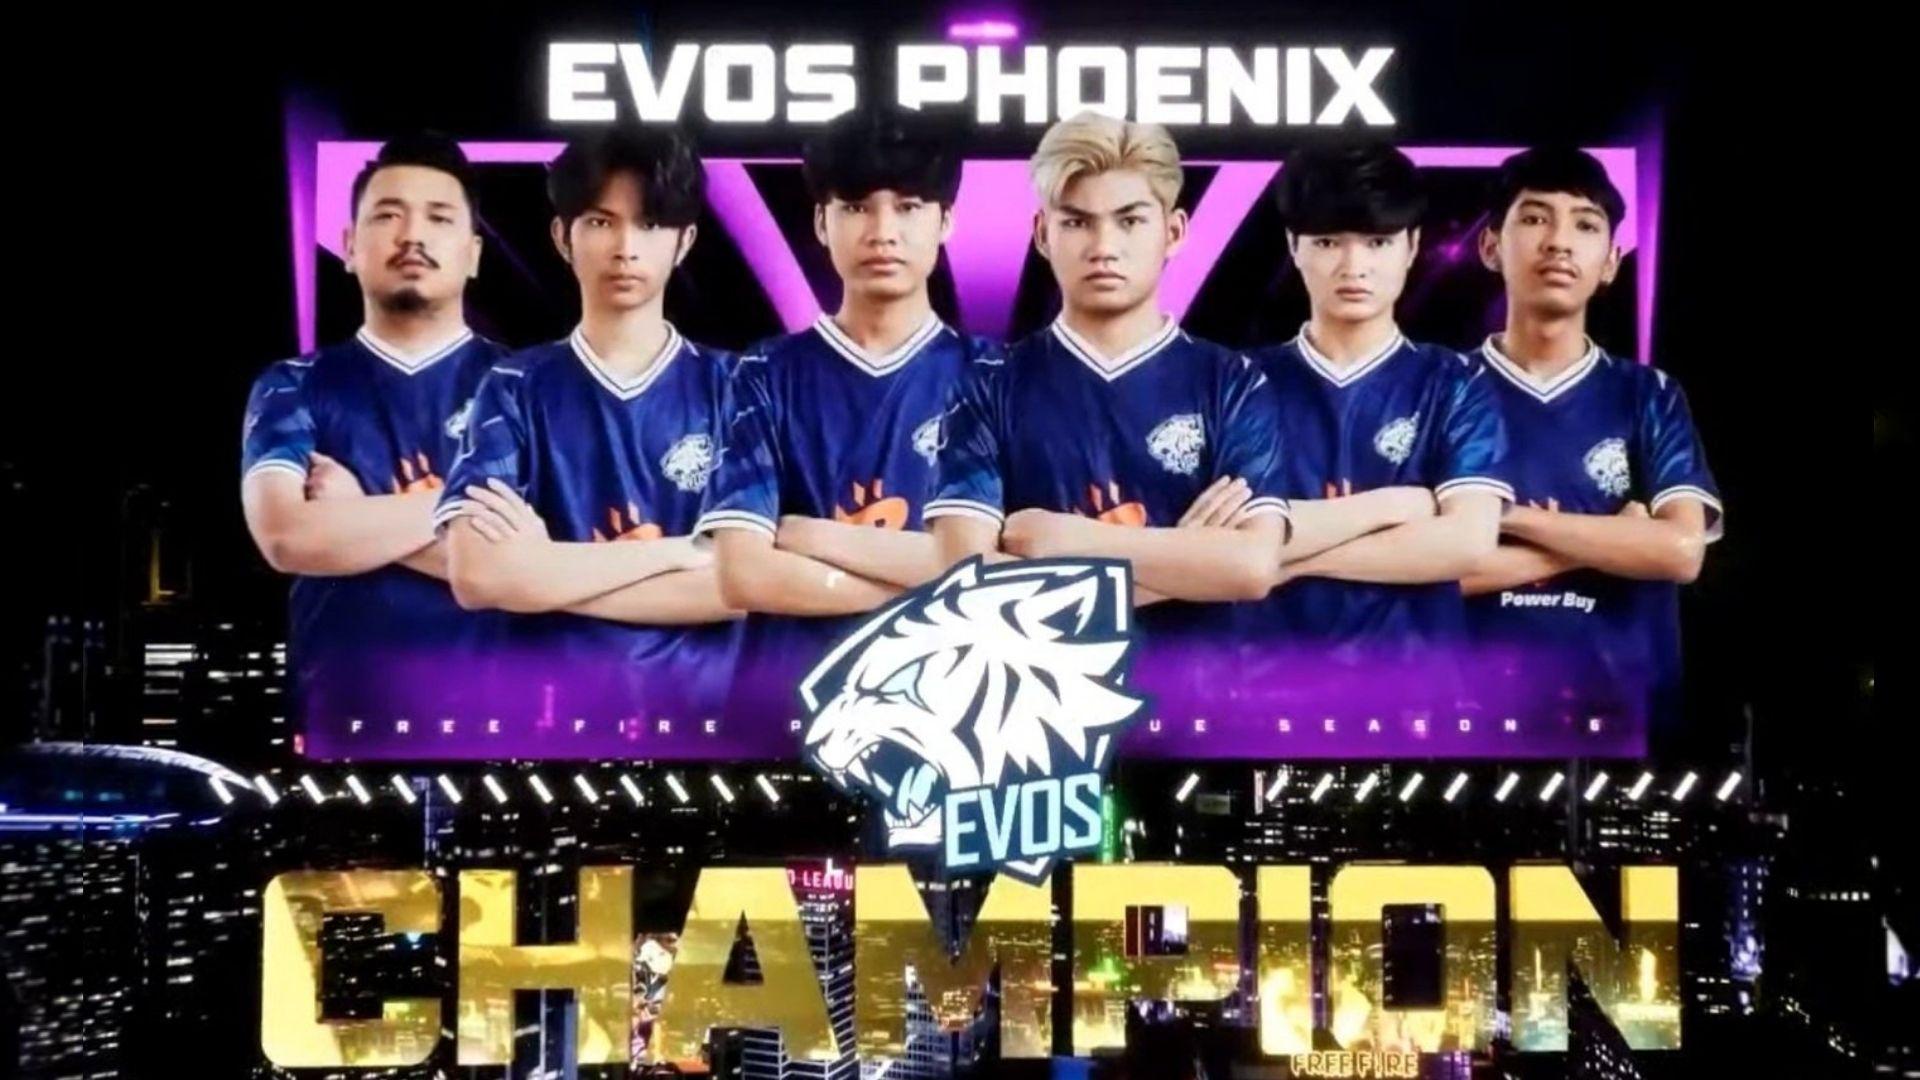 Evos Phoenix is champion of the Free Fire Pro League in Thailand and guarantees a spot in the world